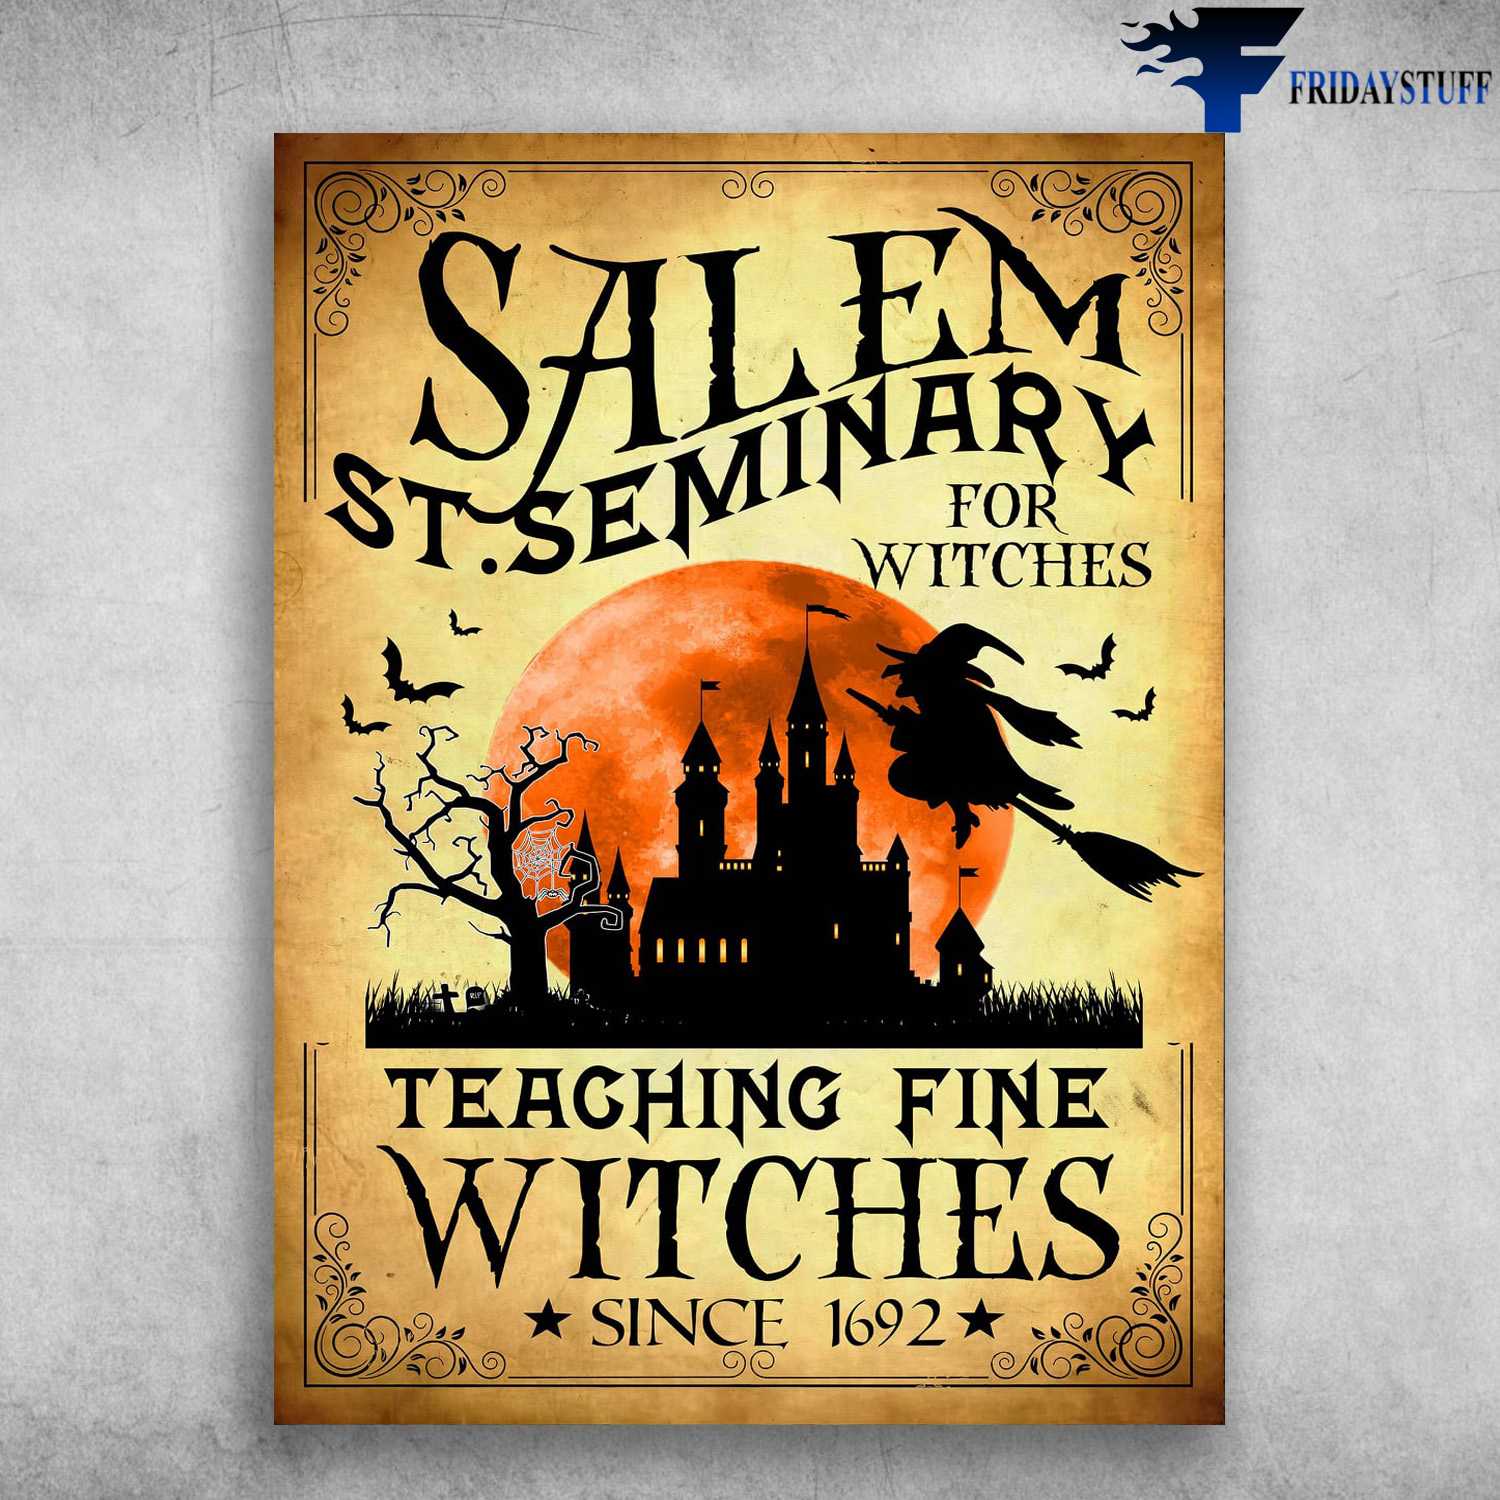 Halloween Poster - Salem St.Seminary, For Witch, Teaching Fine Witches